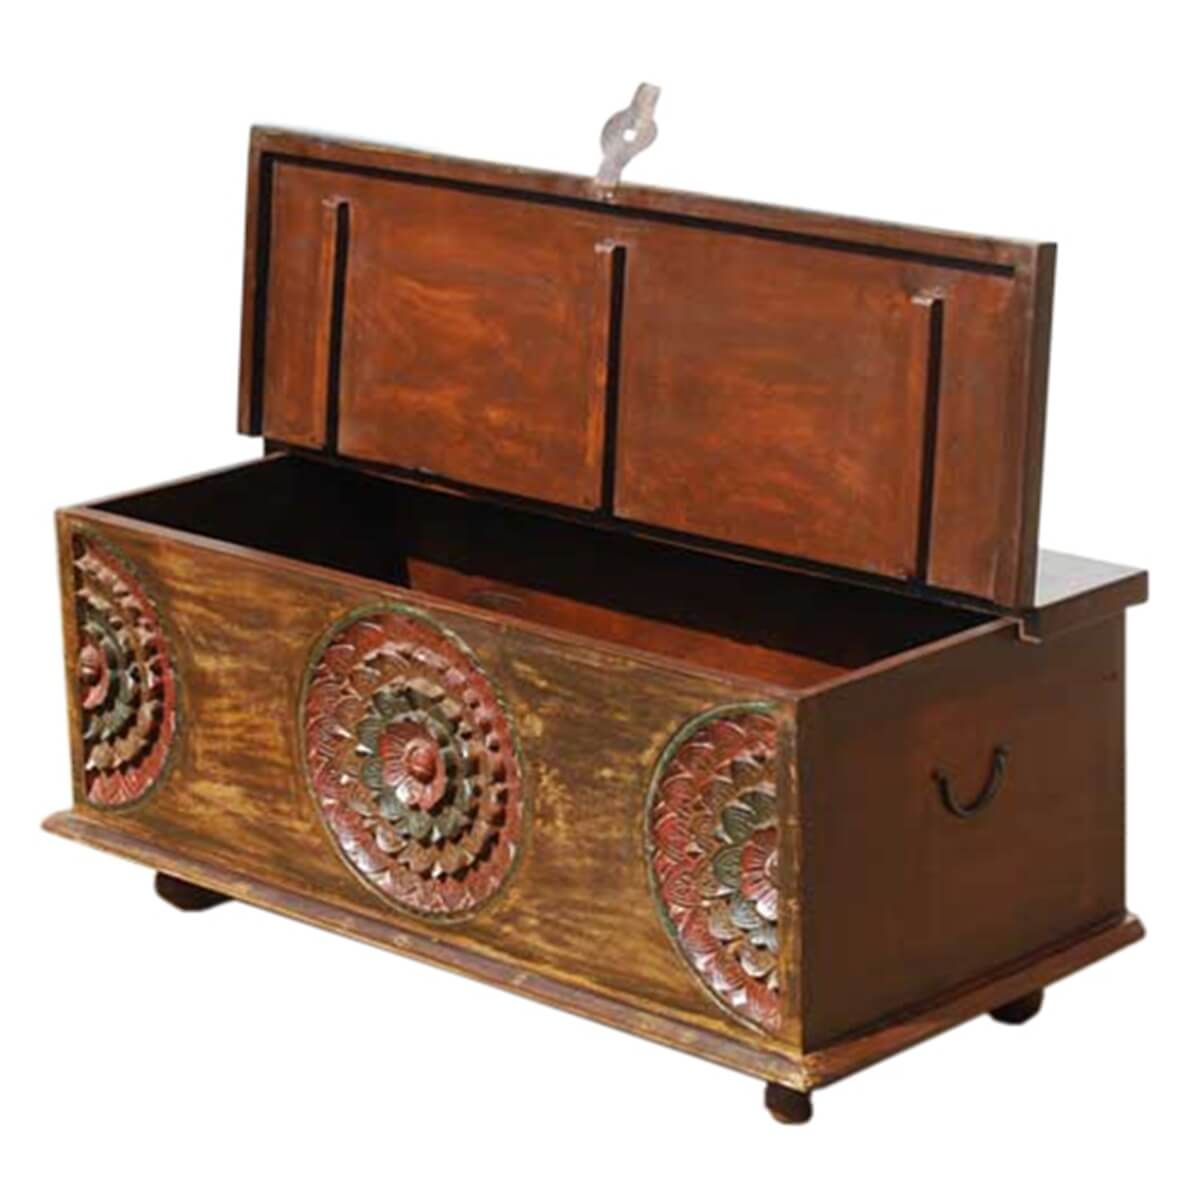 Wood Hand Carved Ethnic Storage Trunk Coffee Table Pertaining To Espresso Wood Trunk Console Tables (View 5 of 20)